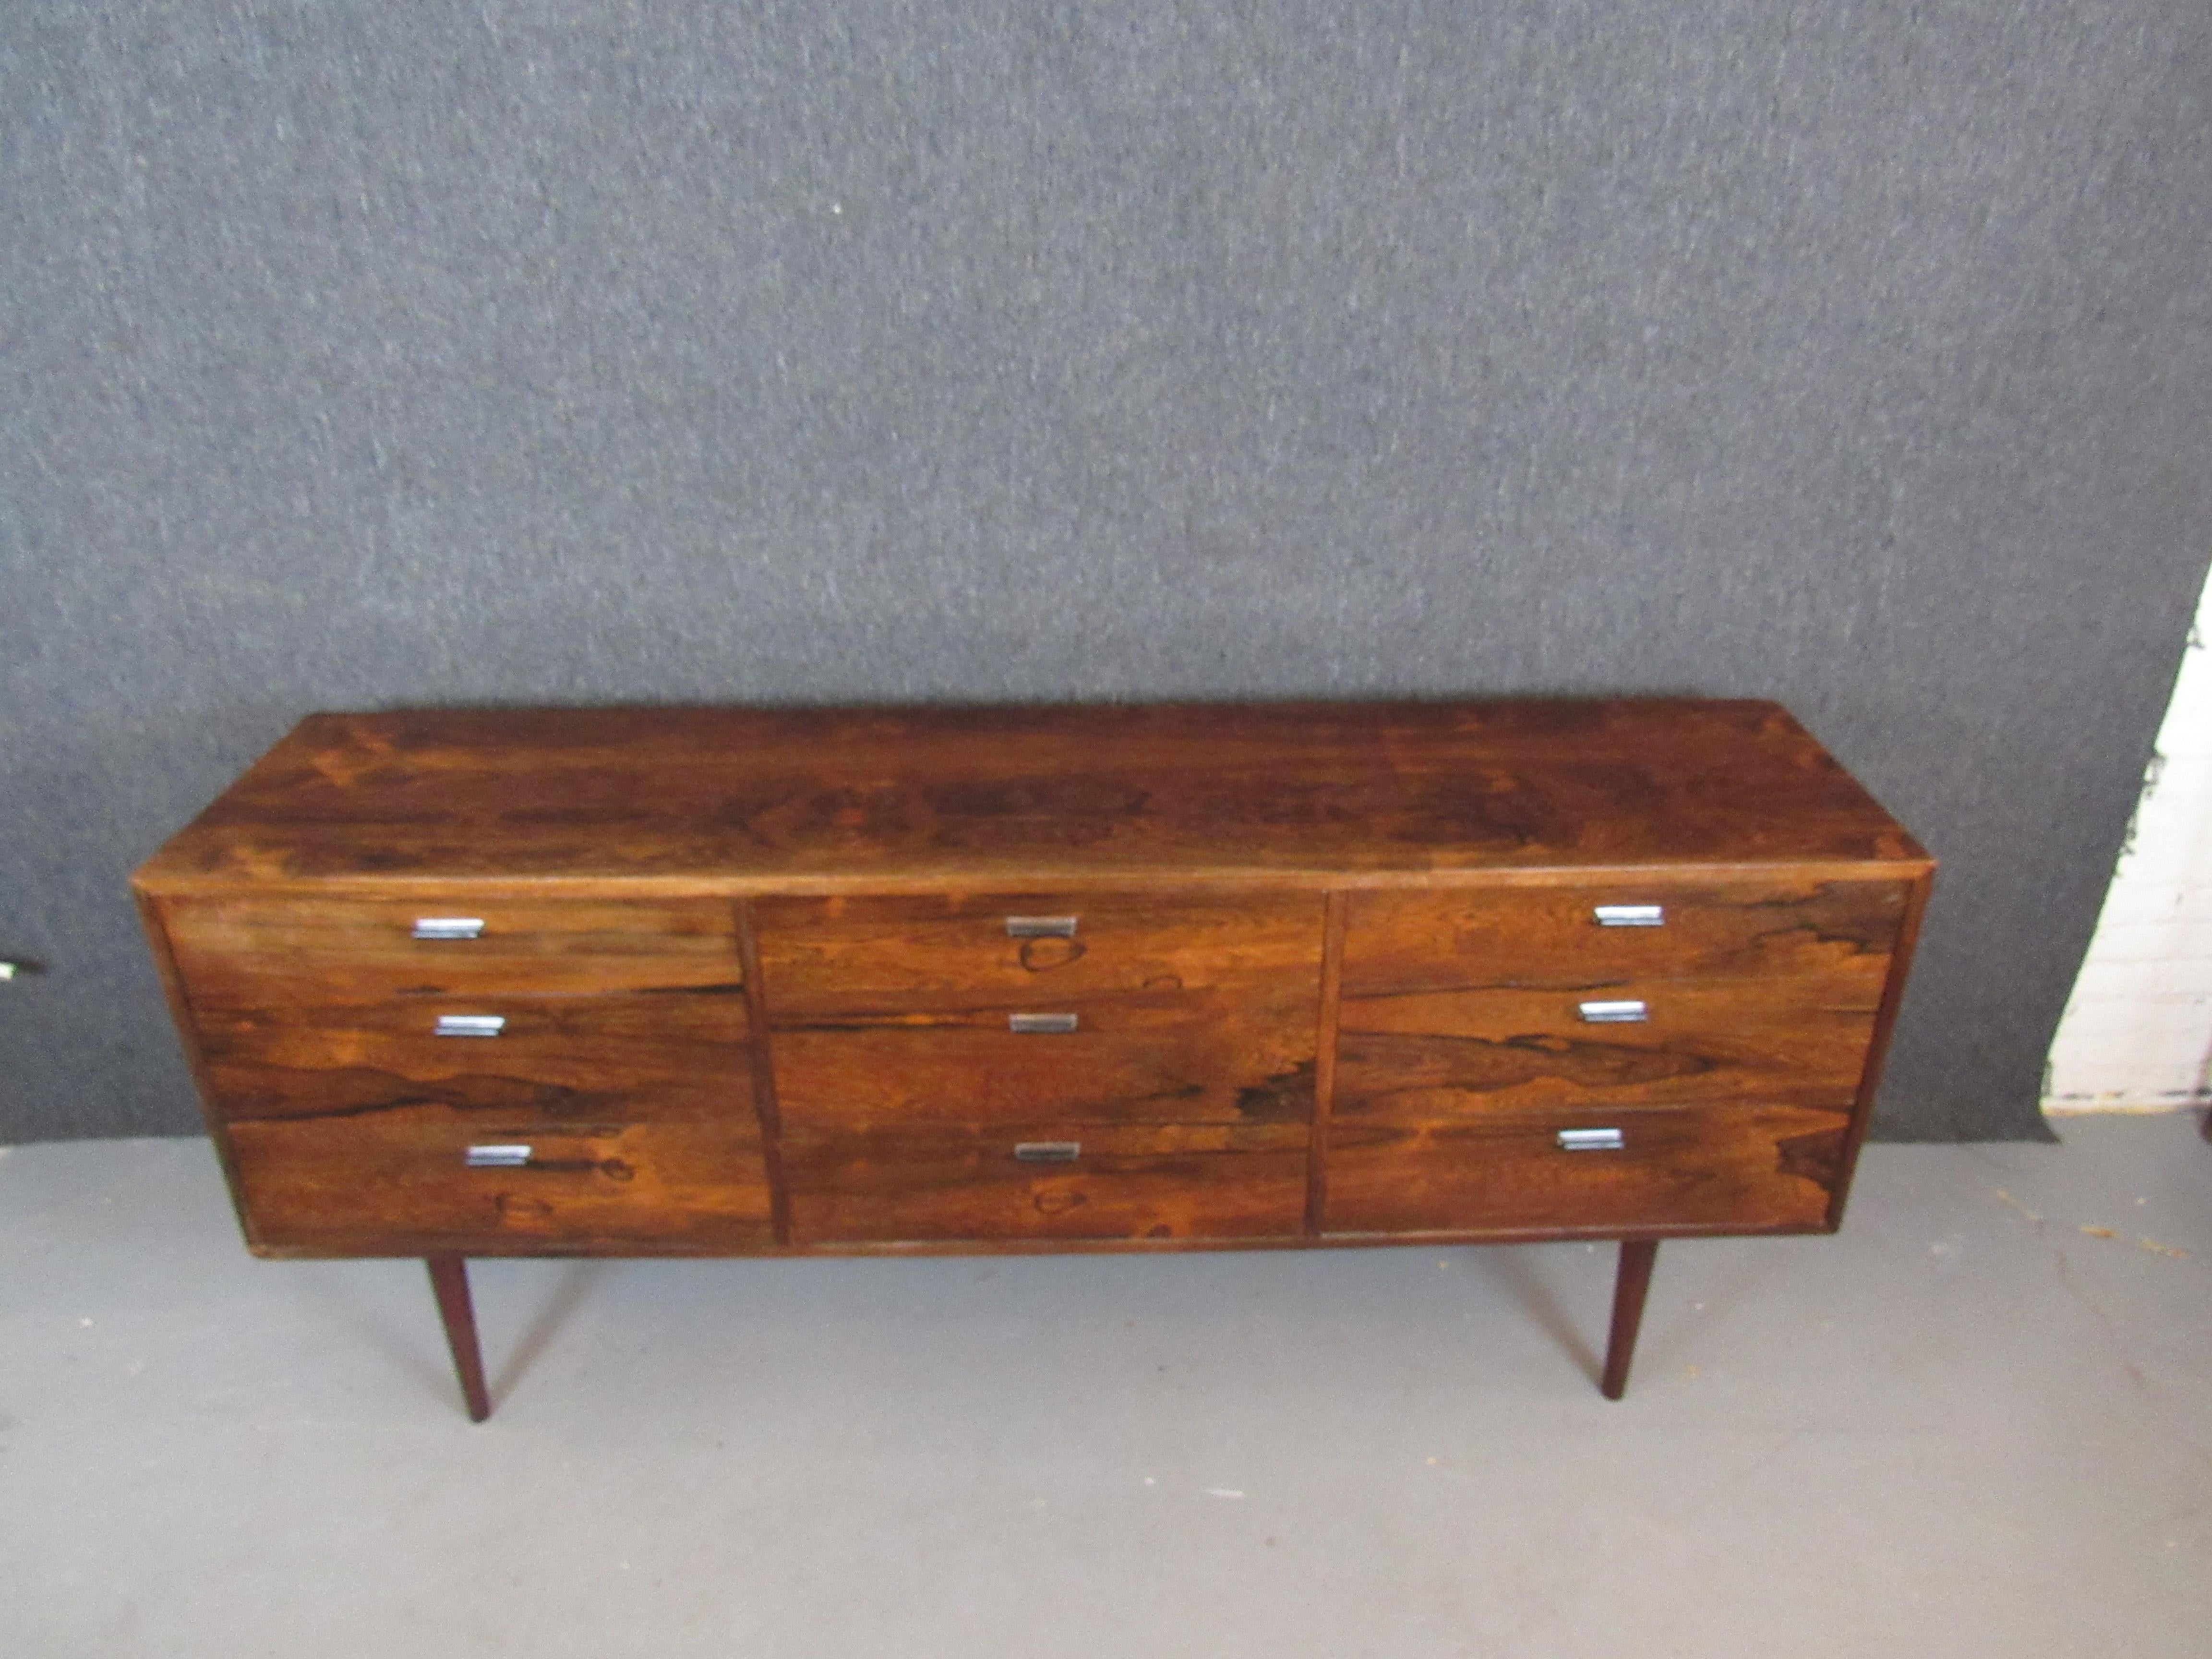 Exceptional mid-century rosewood dresser from American designer master Jack Cartwright for Founders Furniture. Nine ample drawers offer nearly limitless storage options, whether in the home or office. A truly jaw-dropping rosewood front blurs the